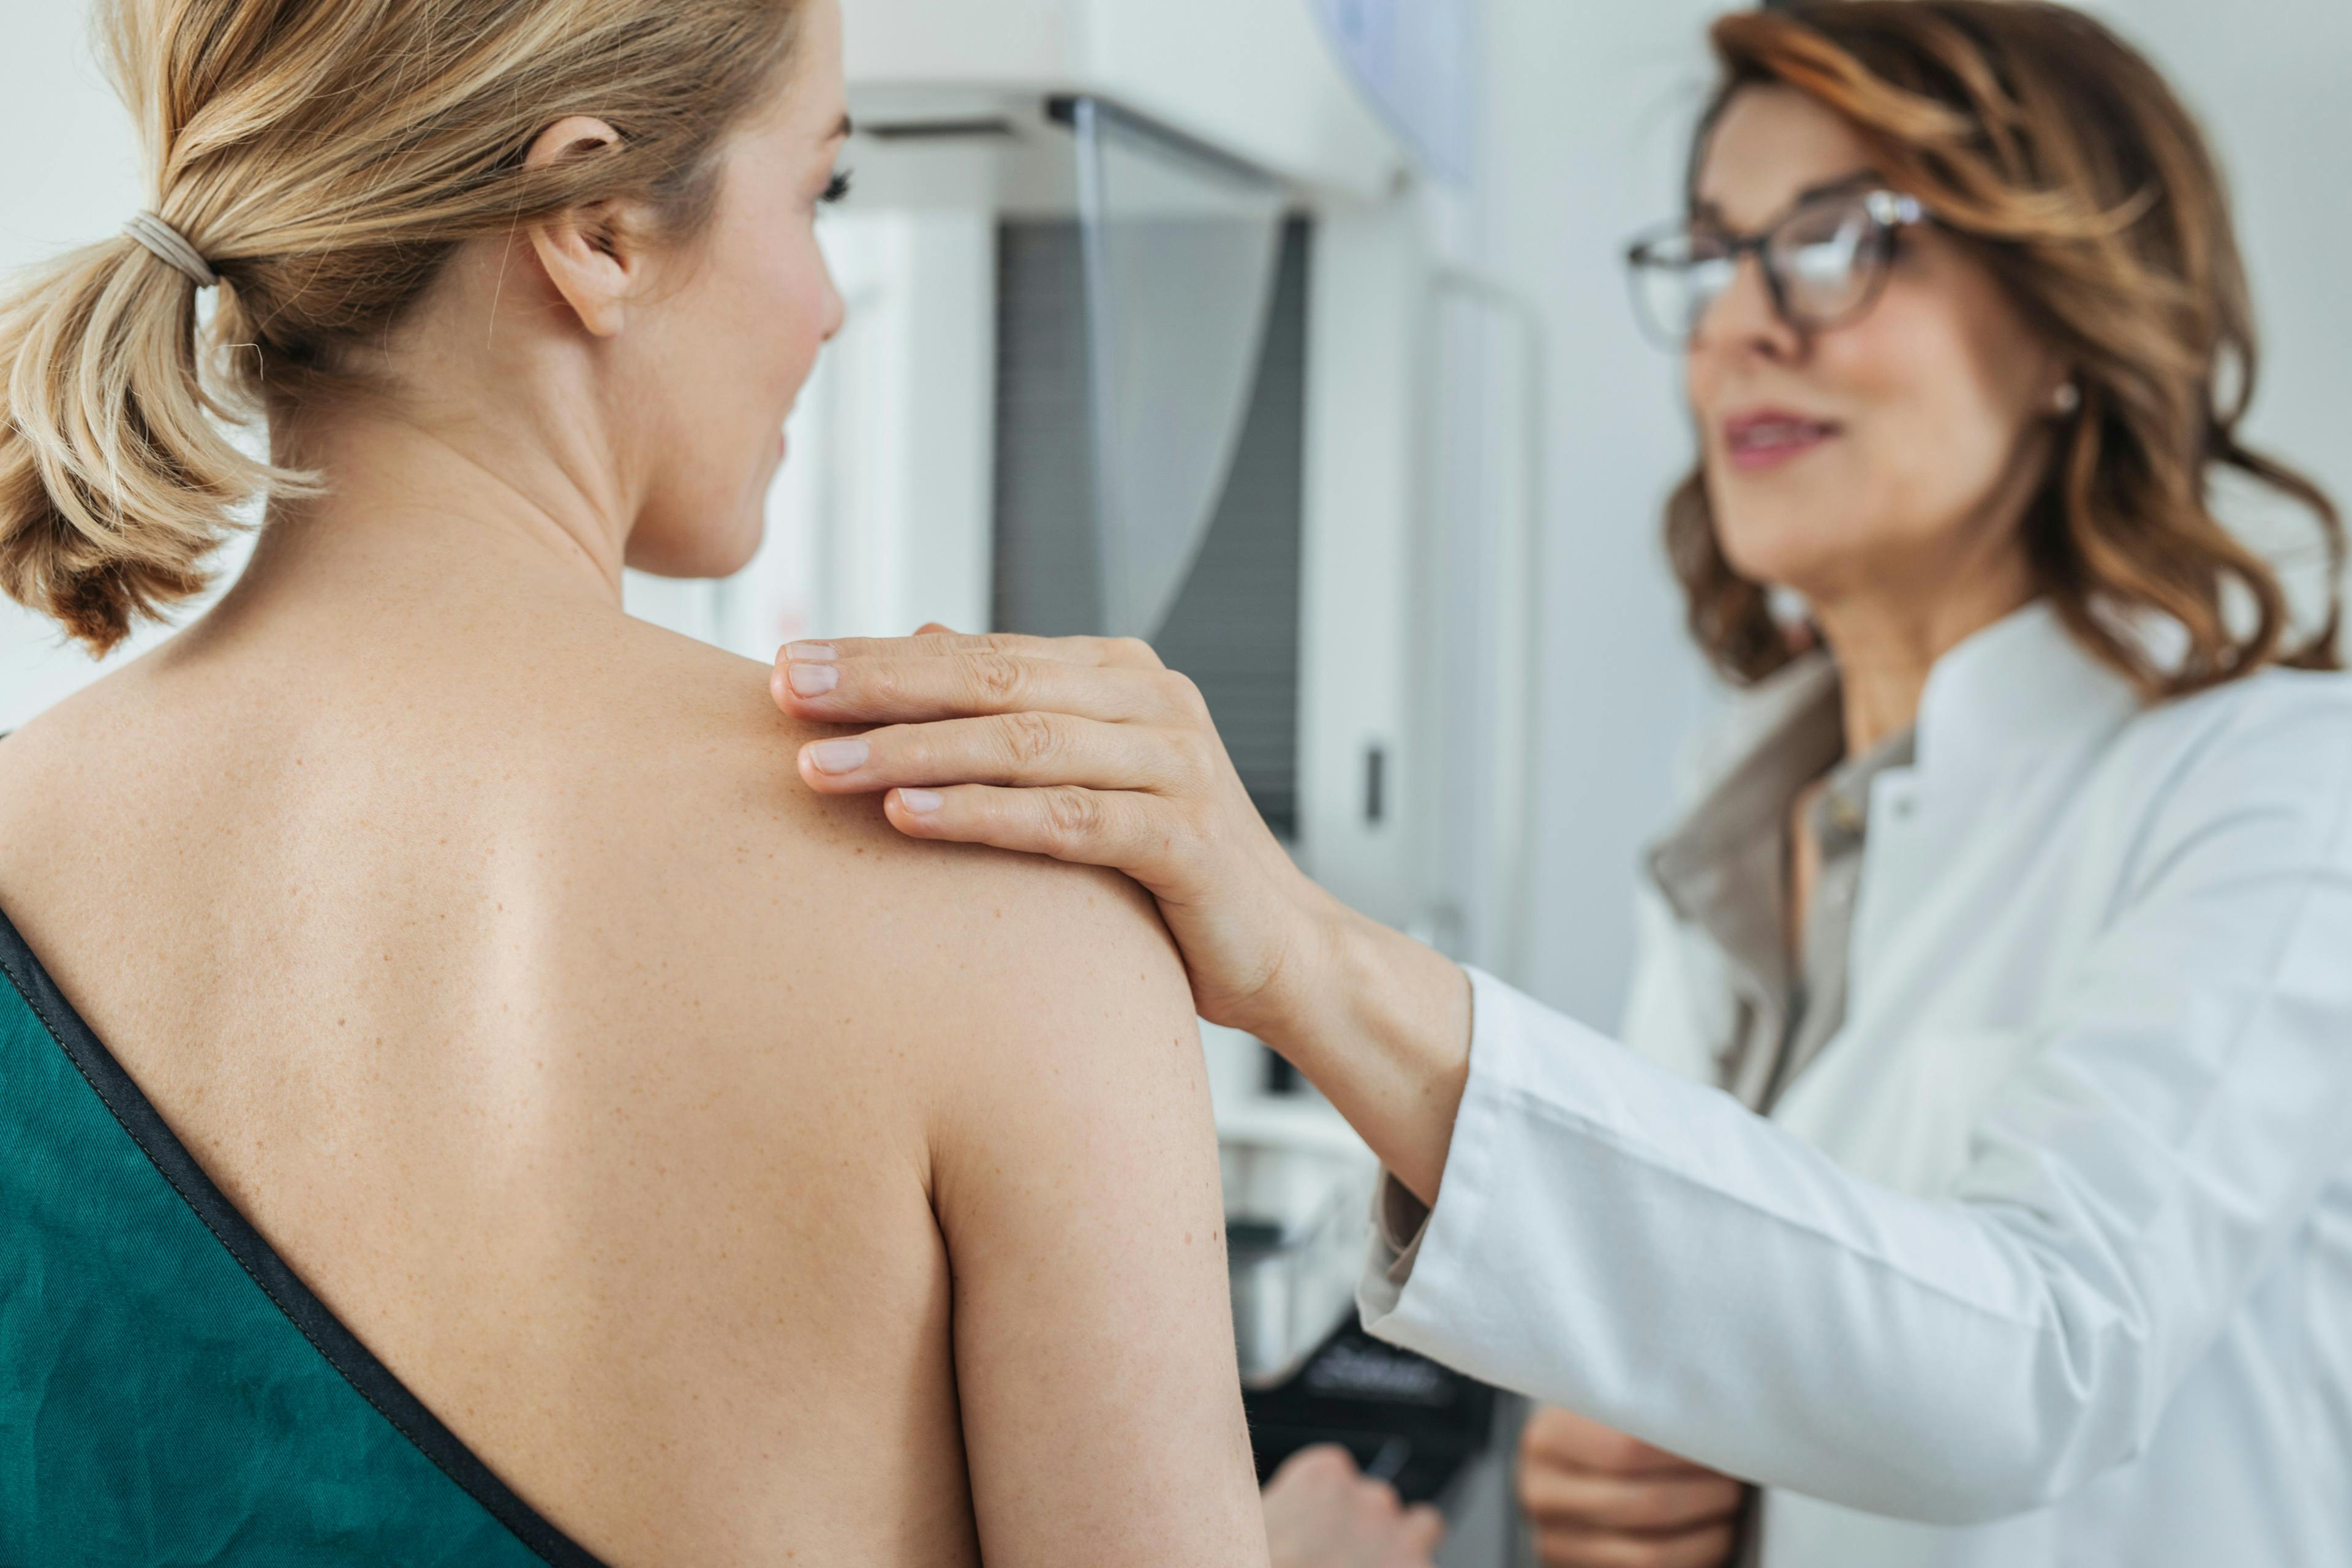 USPSTF lowers recommended screening age for breast cancer to 40 years | Image Credit: © LStockStudio - © LStockStudio - stock.adobe.com.